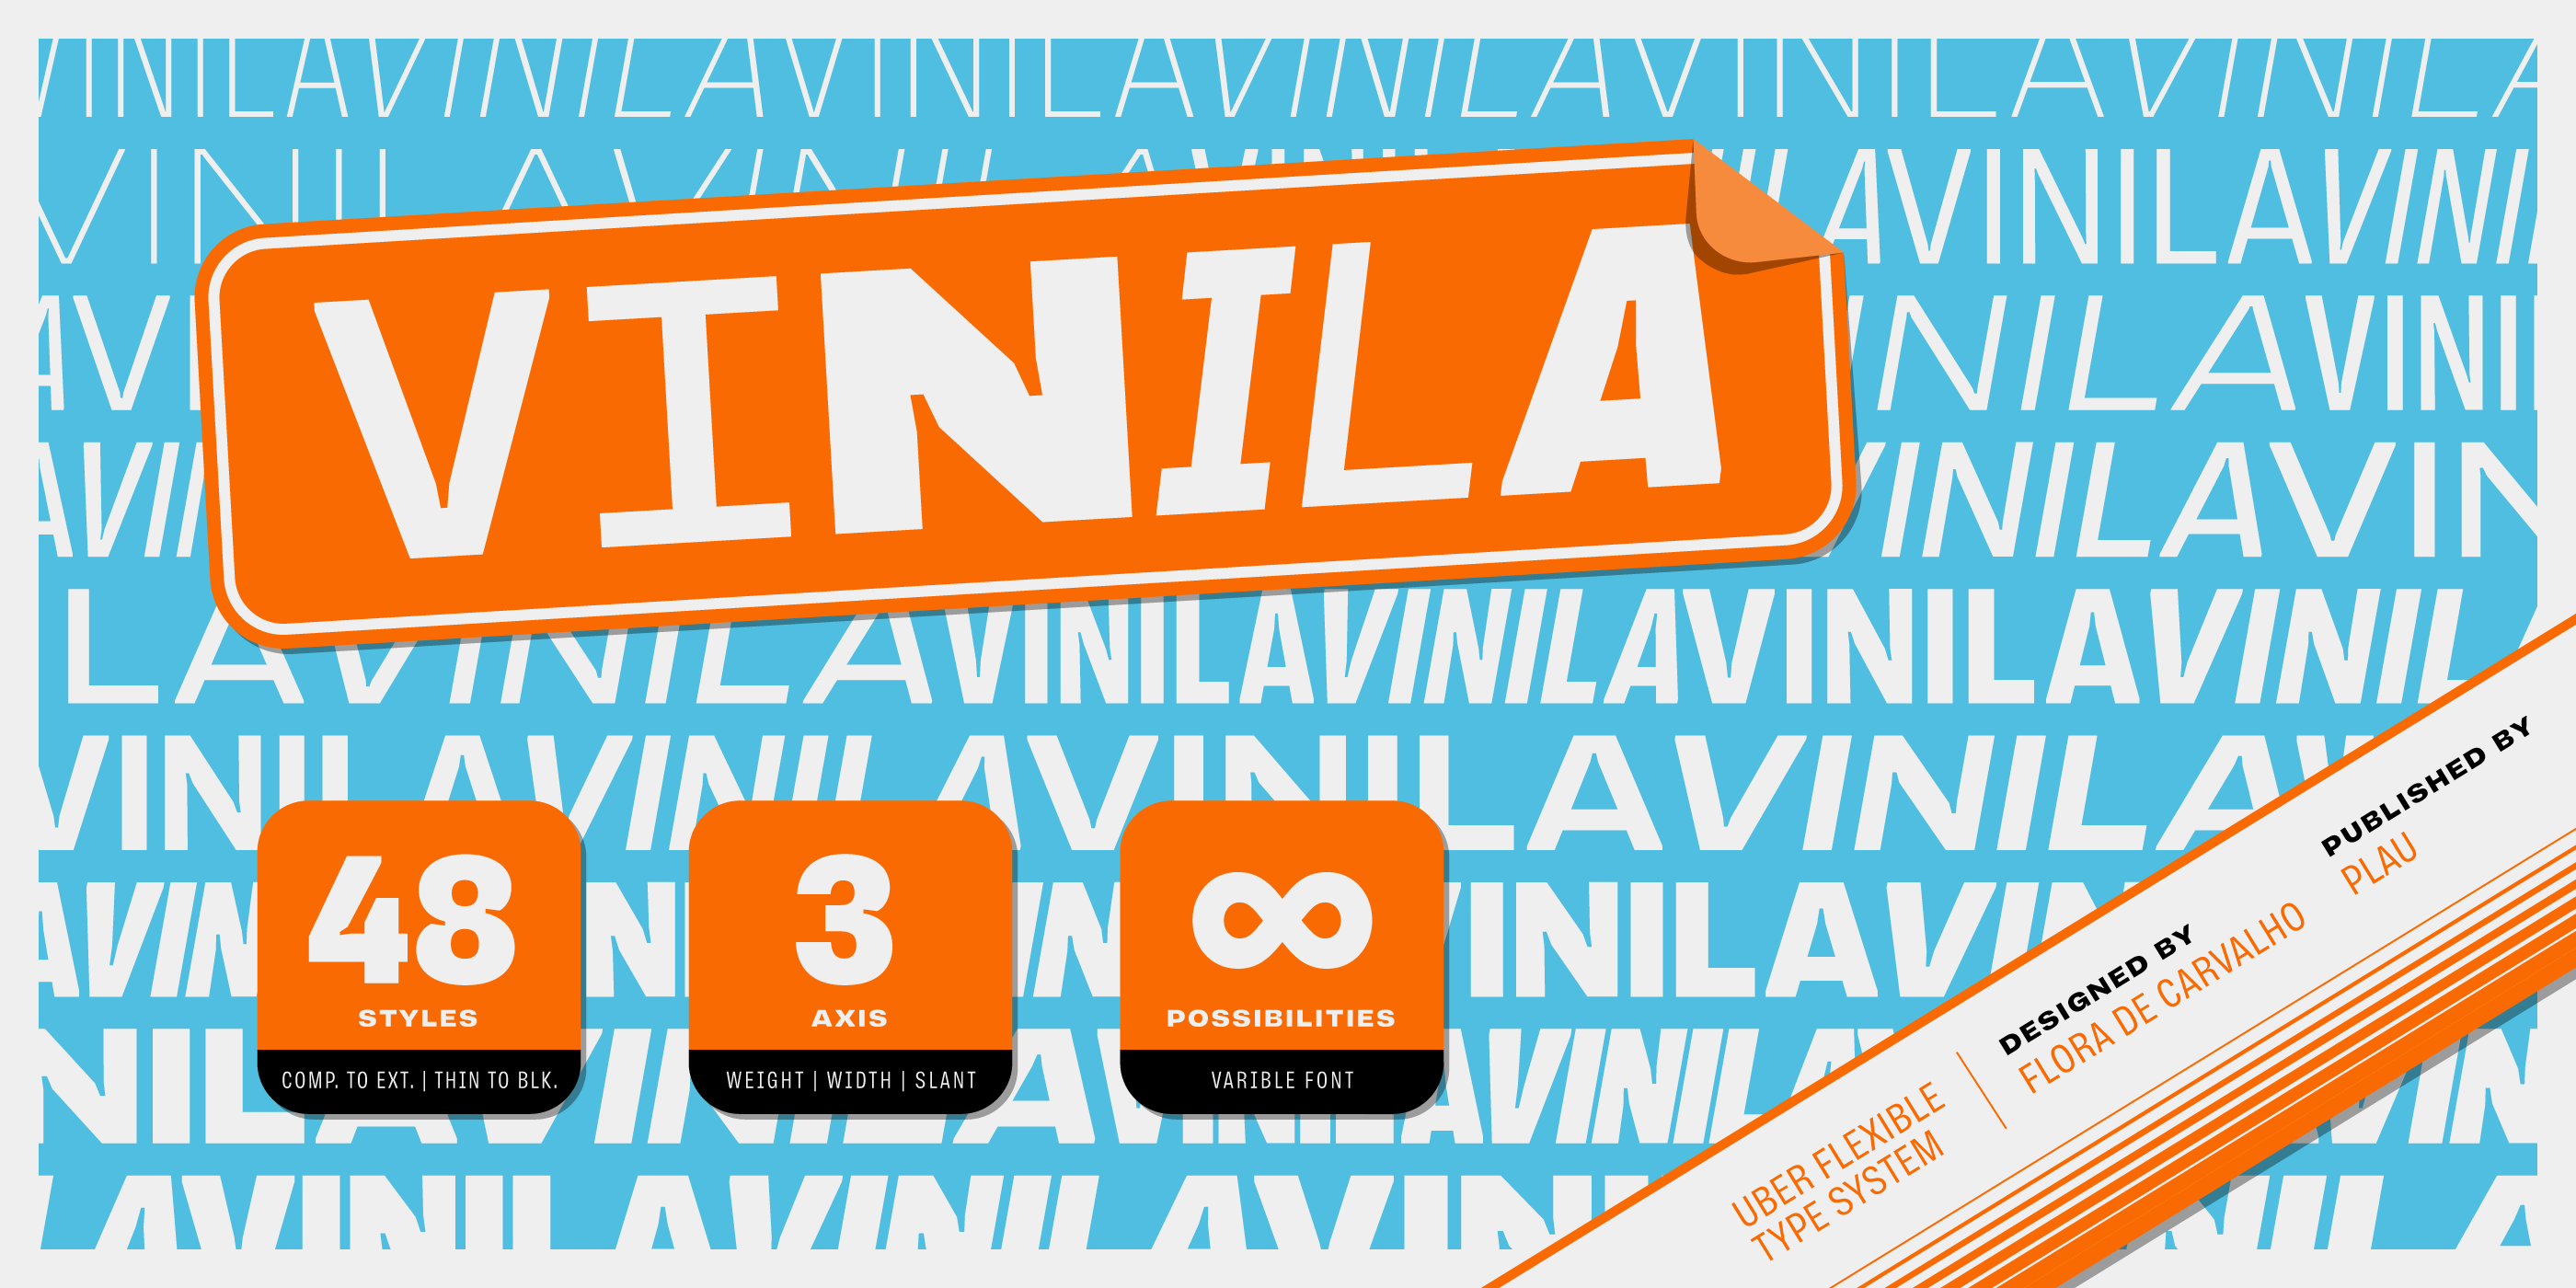 Card displaying Vinila typeface in various styles